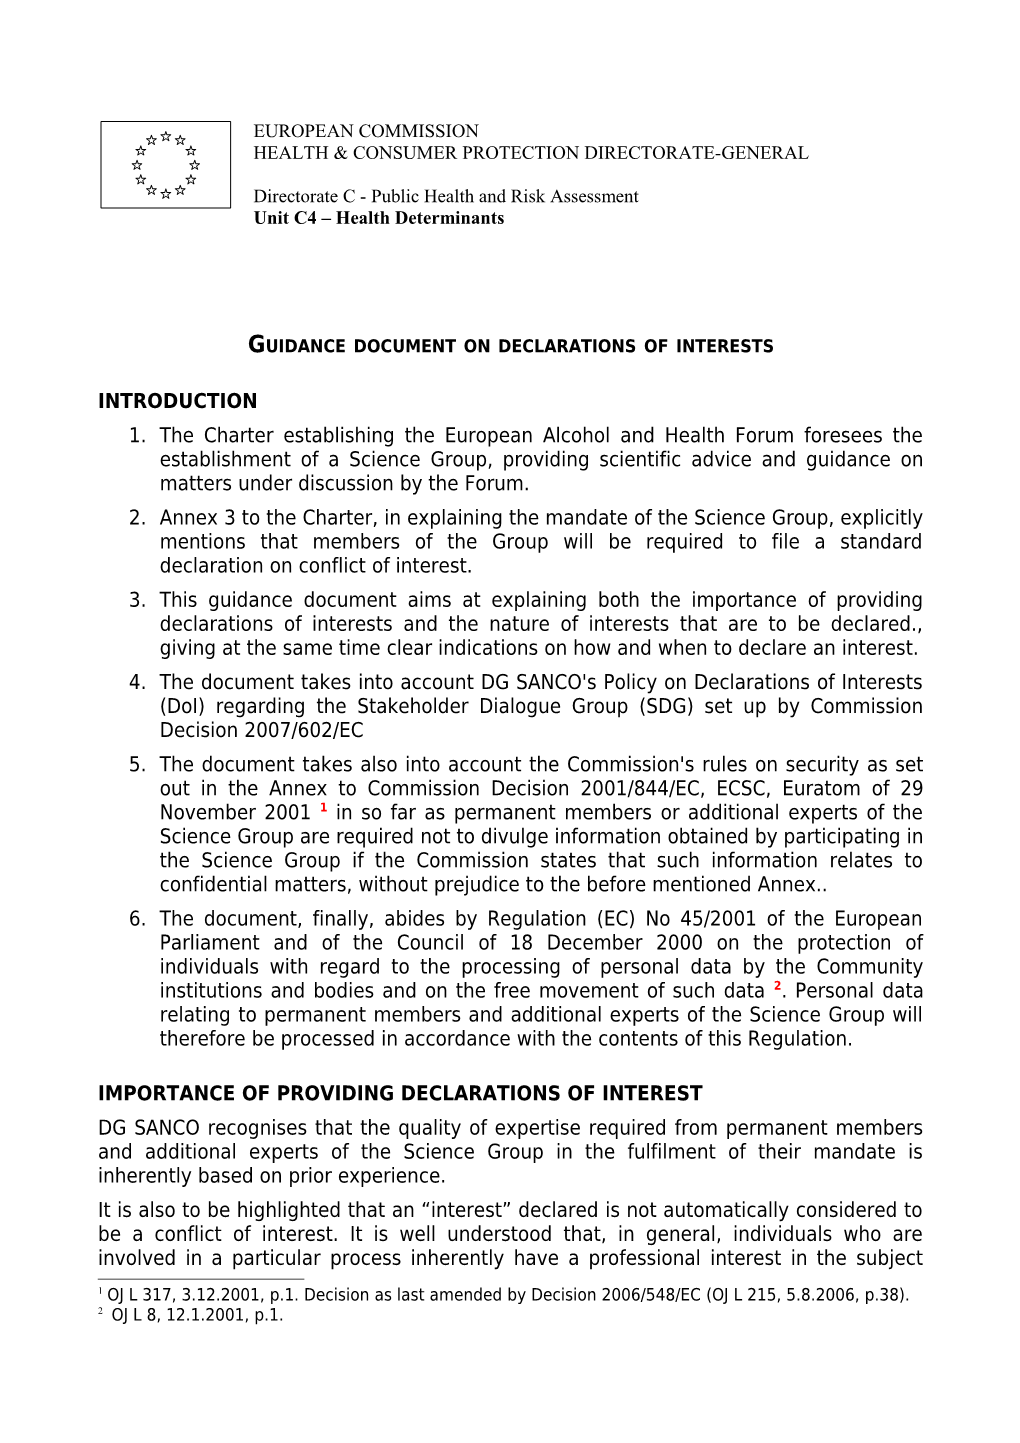 Guidance Document on Declarations of Interests